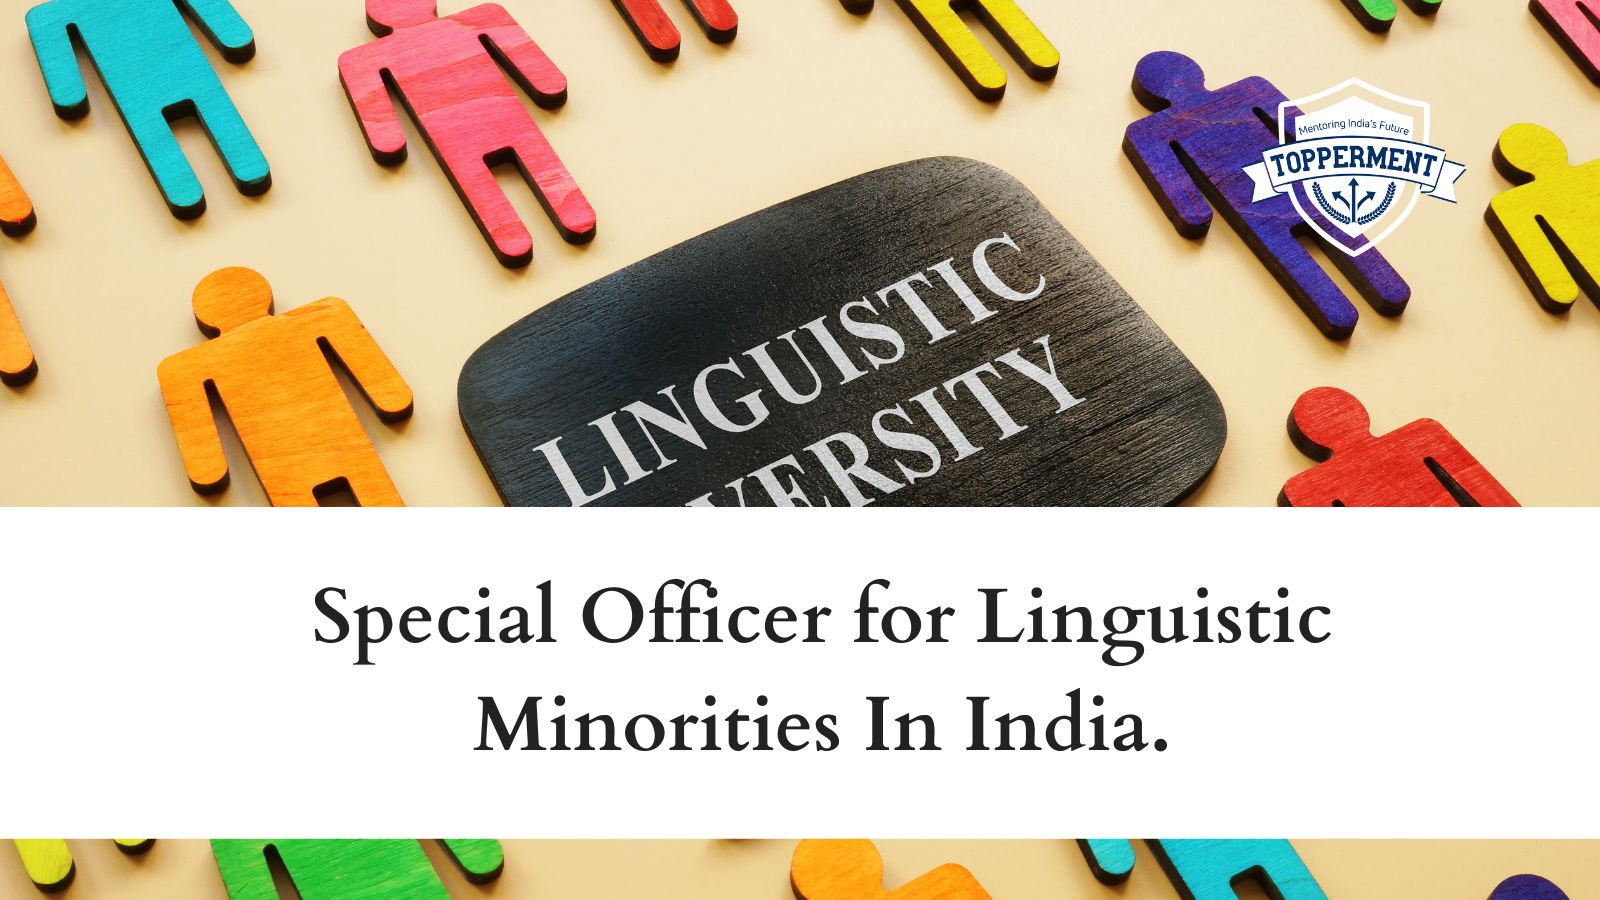 Special-Officer-for-Linguistic-Minorities-In-India-Best-UPSC-IAS-Coaching-For-Mentorship-And-Guidance